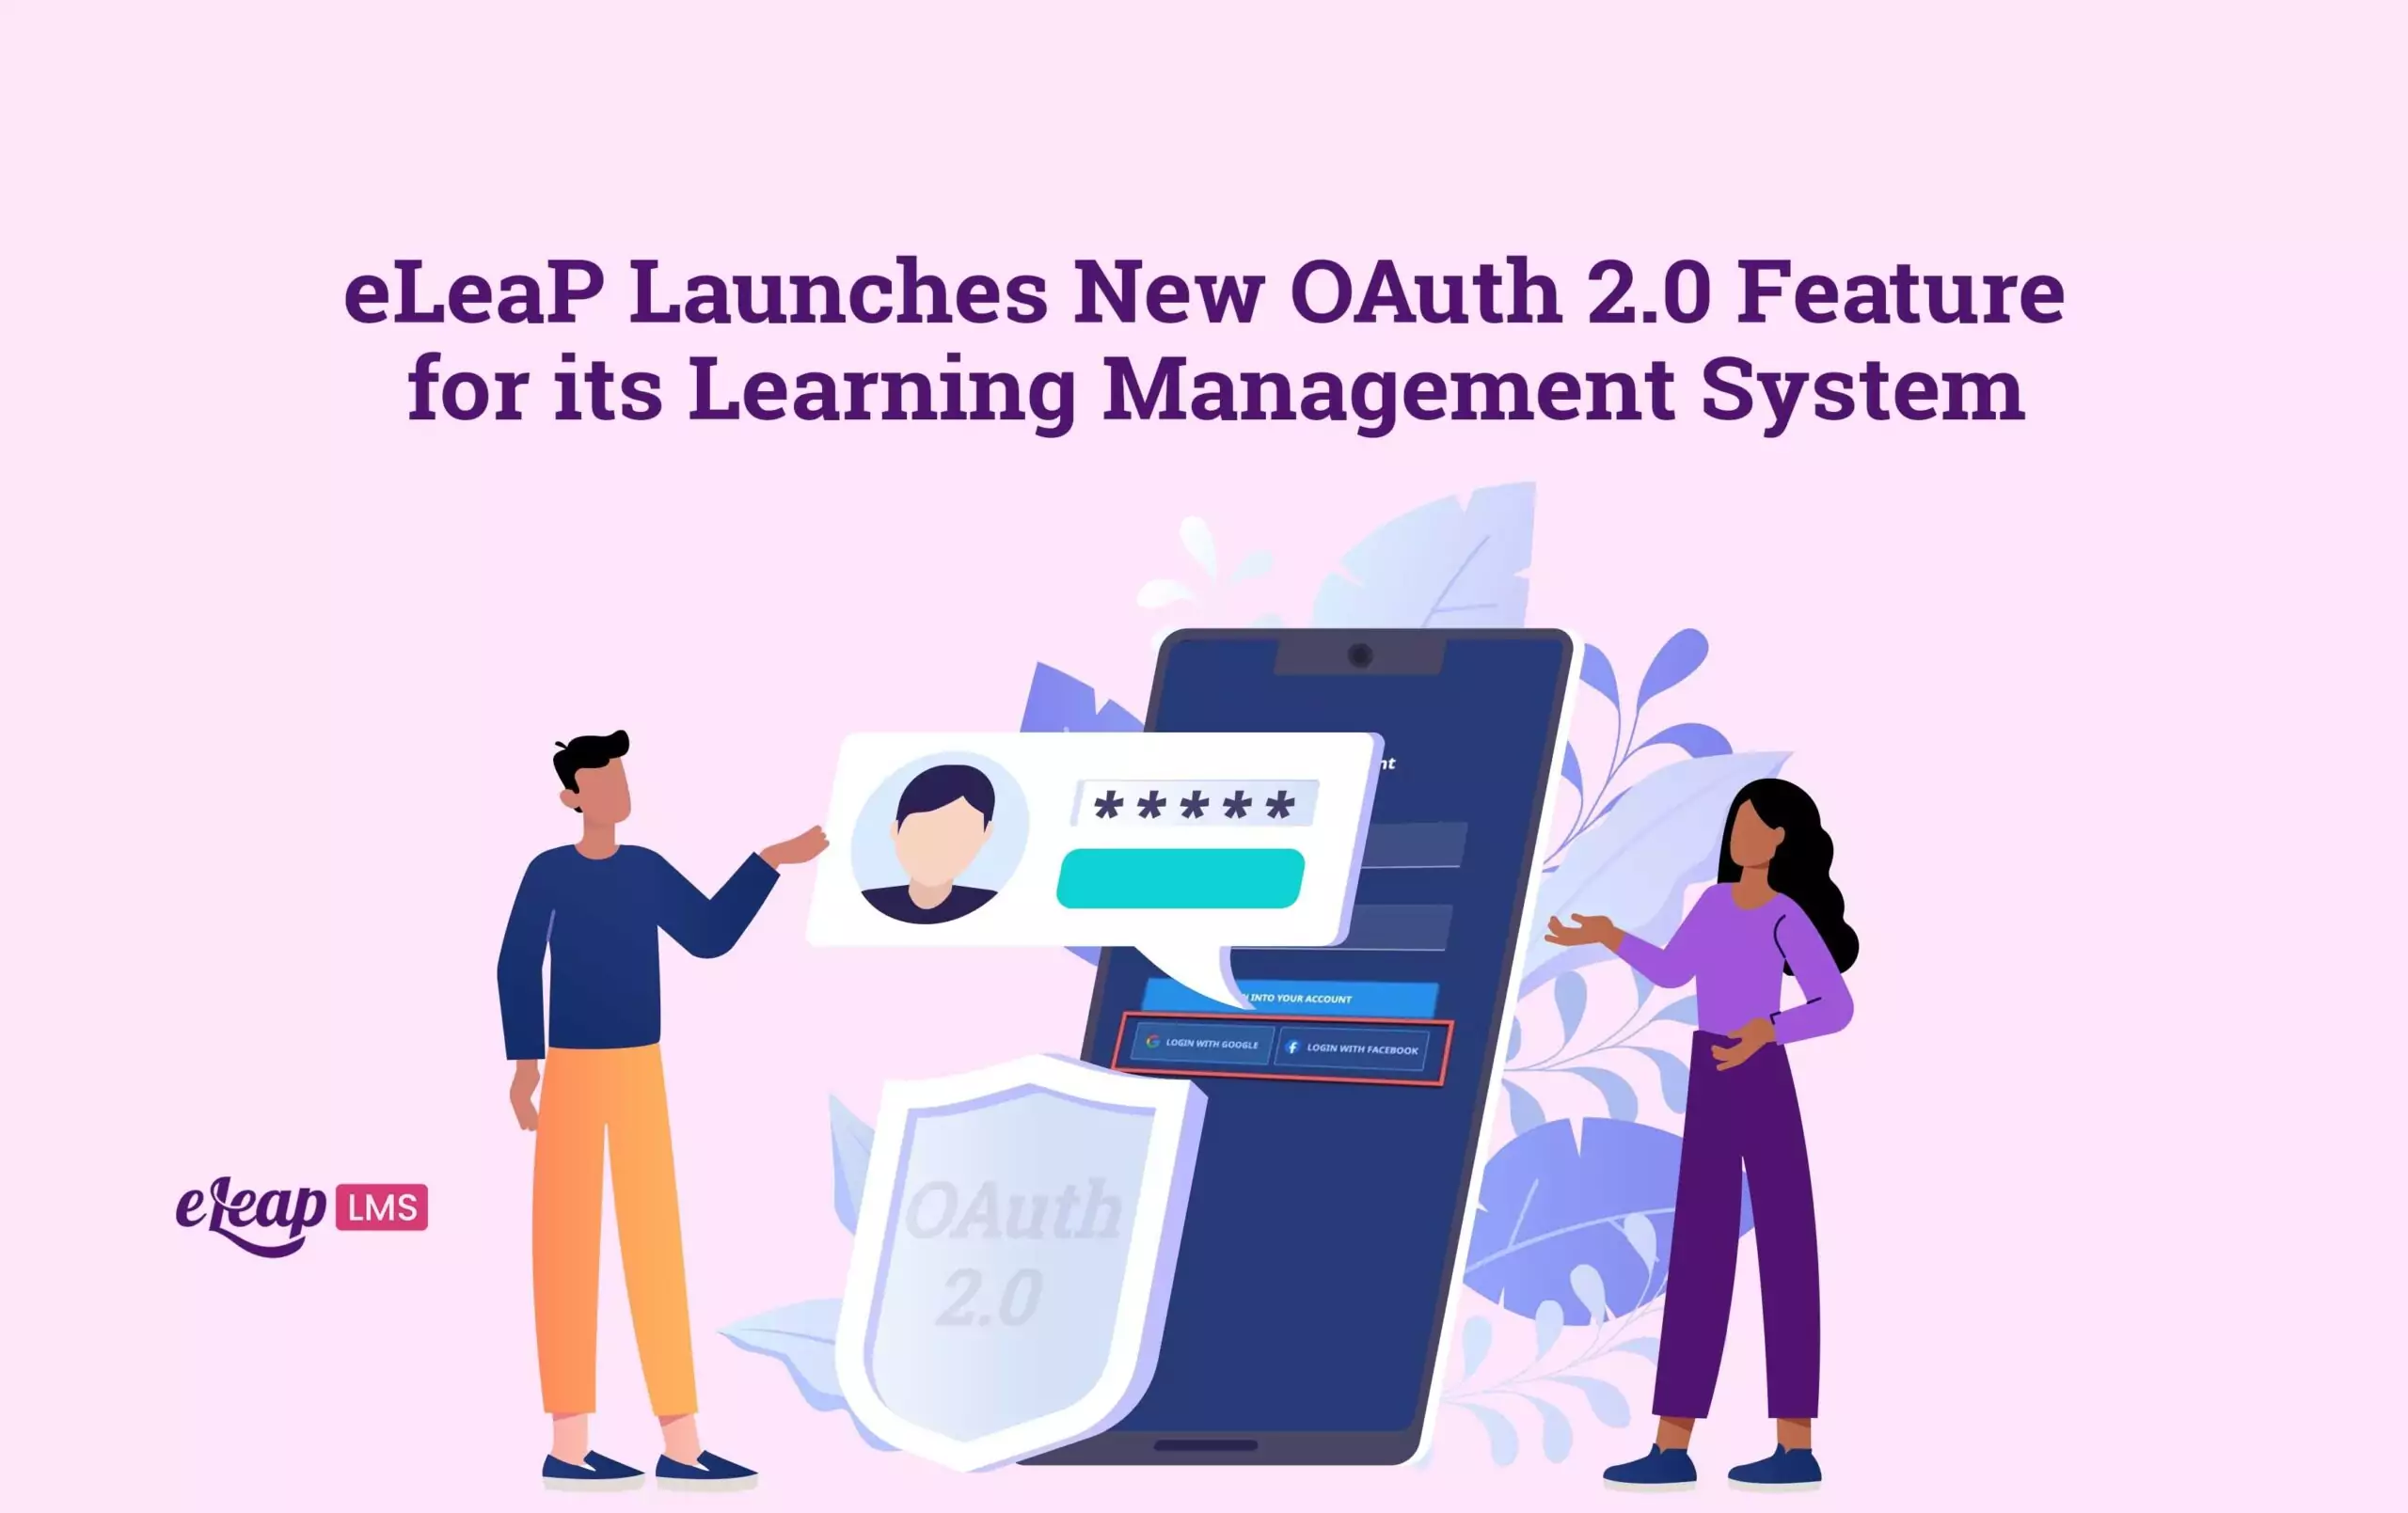 eLeaP Launches New OAuth 2.0 Feature for its Learning Management System